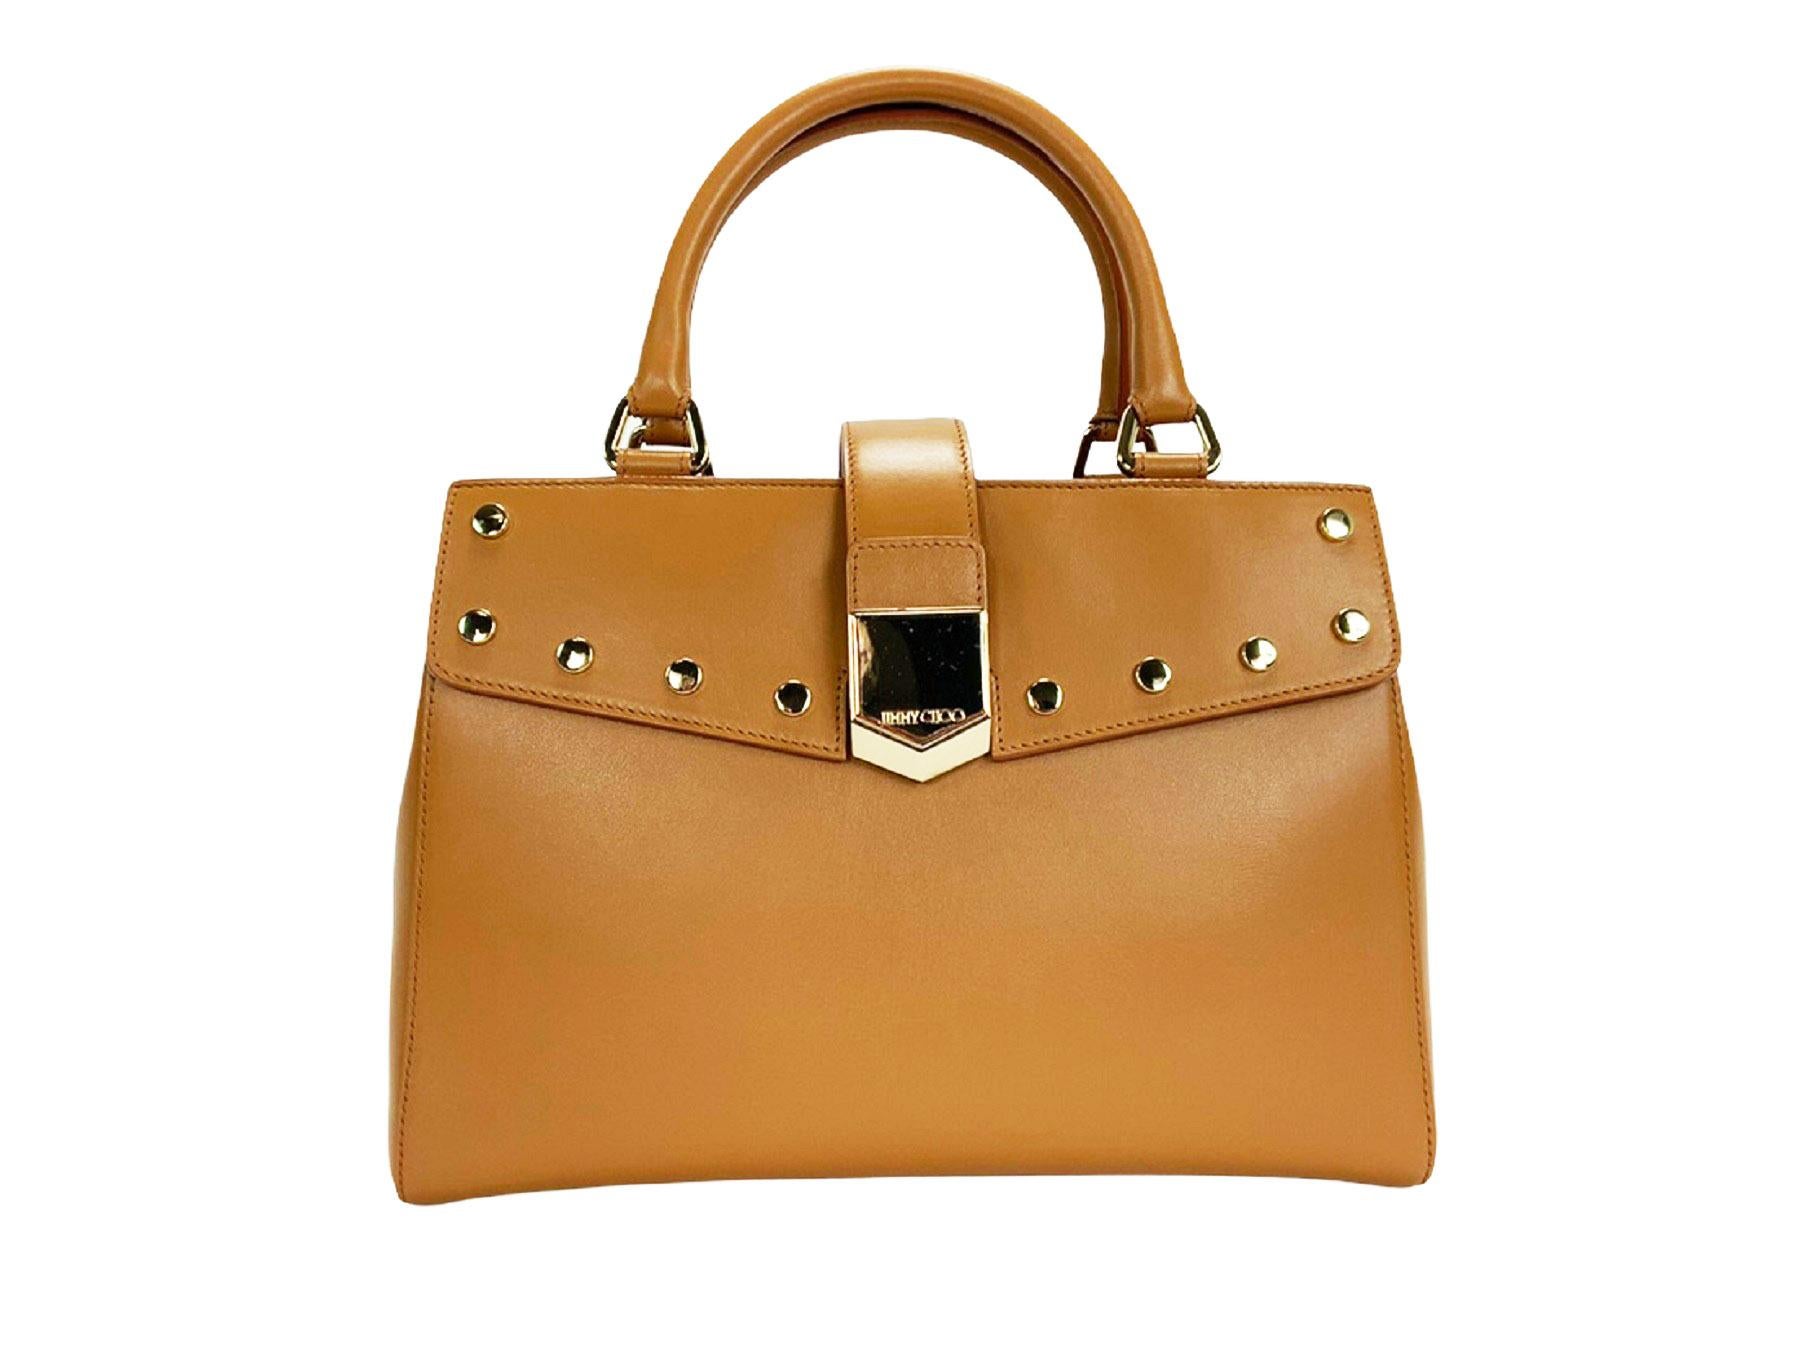 New Jimmy Choo *Lockett* Handbag Tote
Brown Leather, Gold-Tone Hardware, Medium Size, Magnetic Snap Closure, Center Zip Pocket, One Interior Side Pocket. 
Dual Rolled Top Handles, Beige Interior Lining.
Measurements: W - 12 inches, H - 8.5